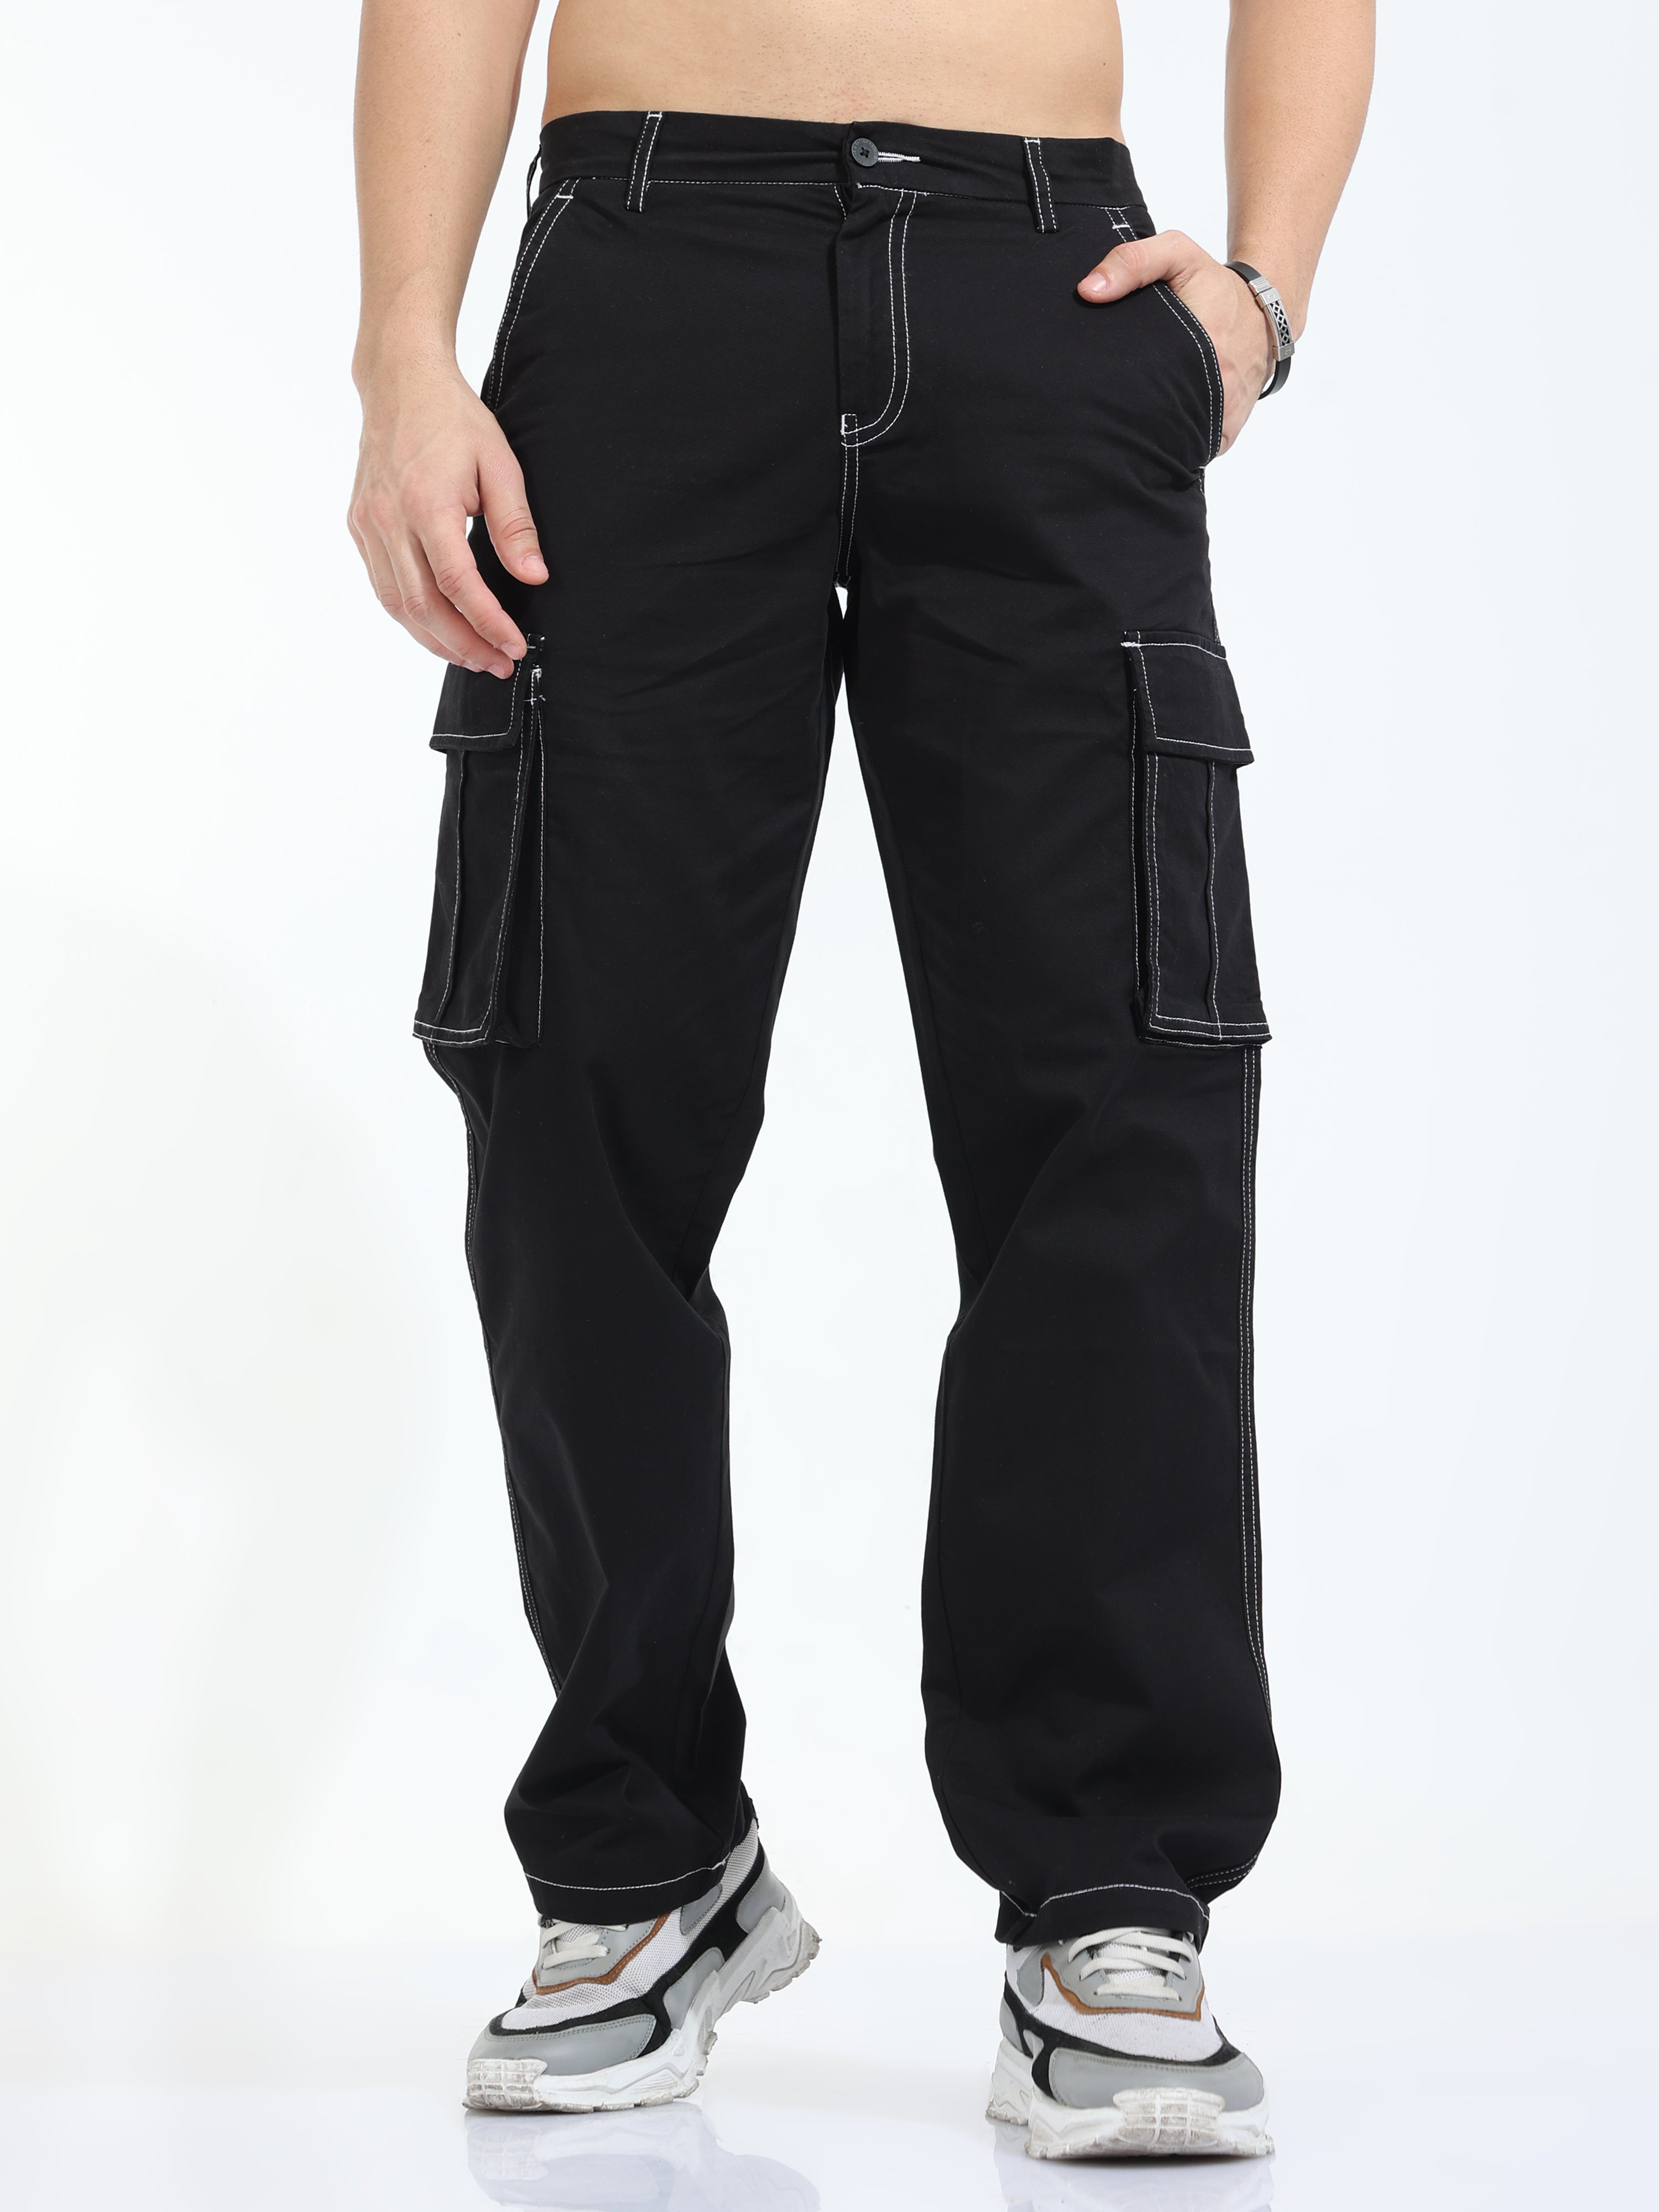 Mens Baggy Cargo Pant (Black) in Jodhpur at best price by Bagtesh Fashion -  Justdial